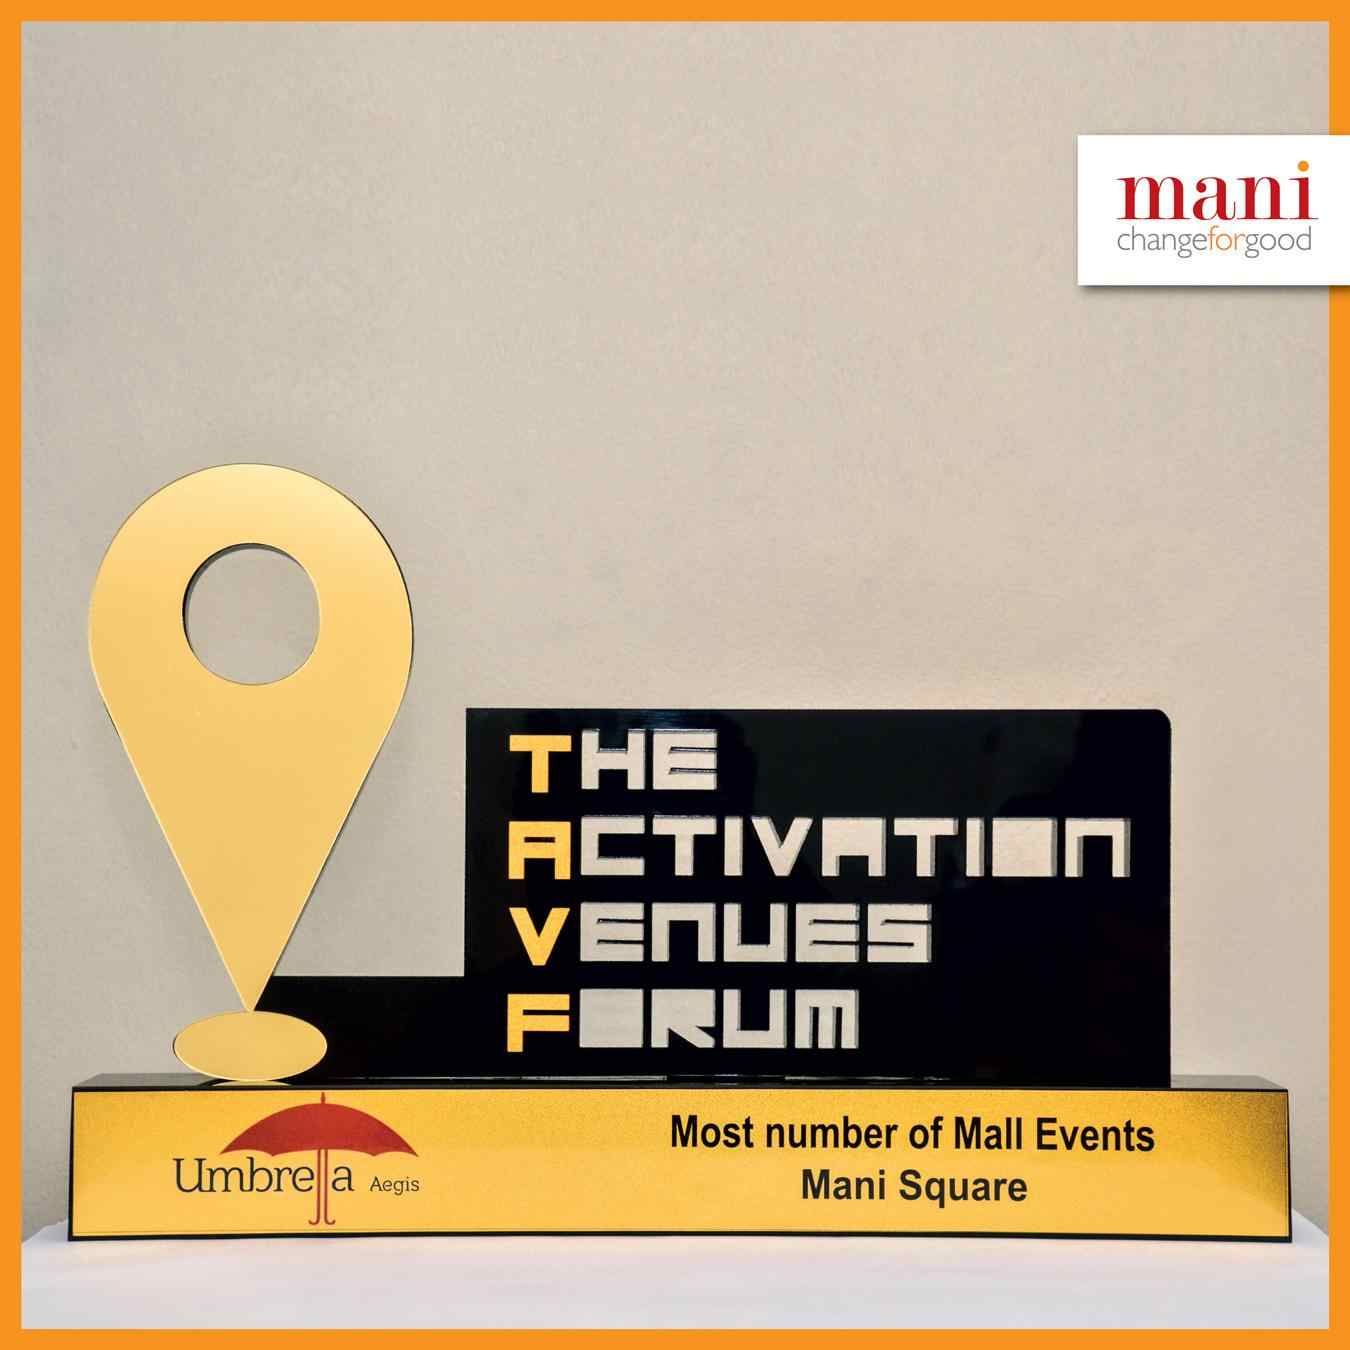 Mani Square in Kolkata awarded for “Most numbers of Mall Events” in TAVF AWARD 2017